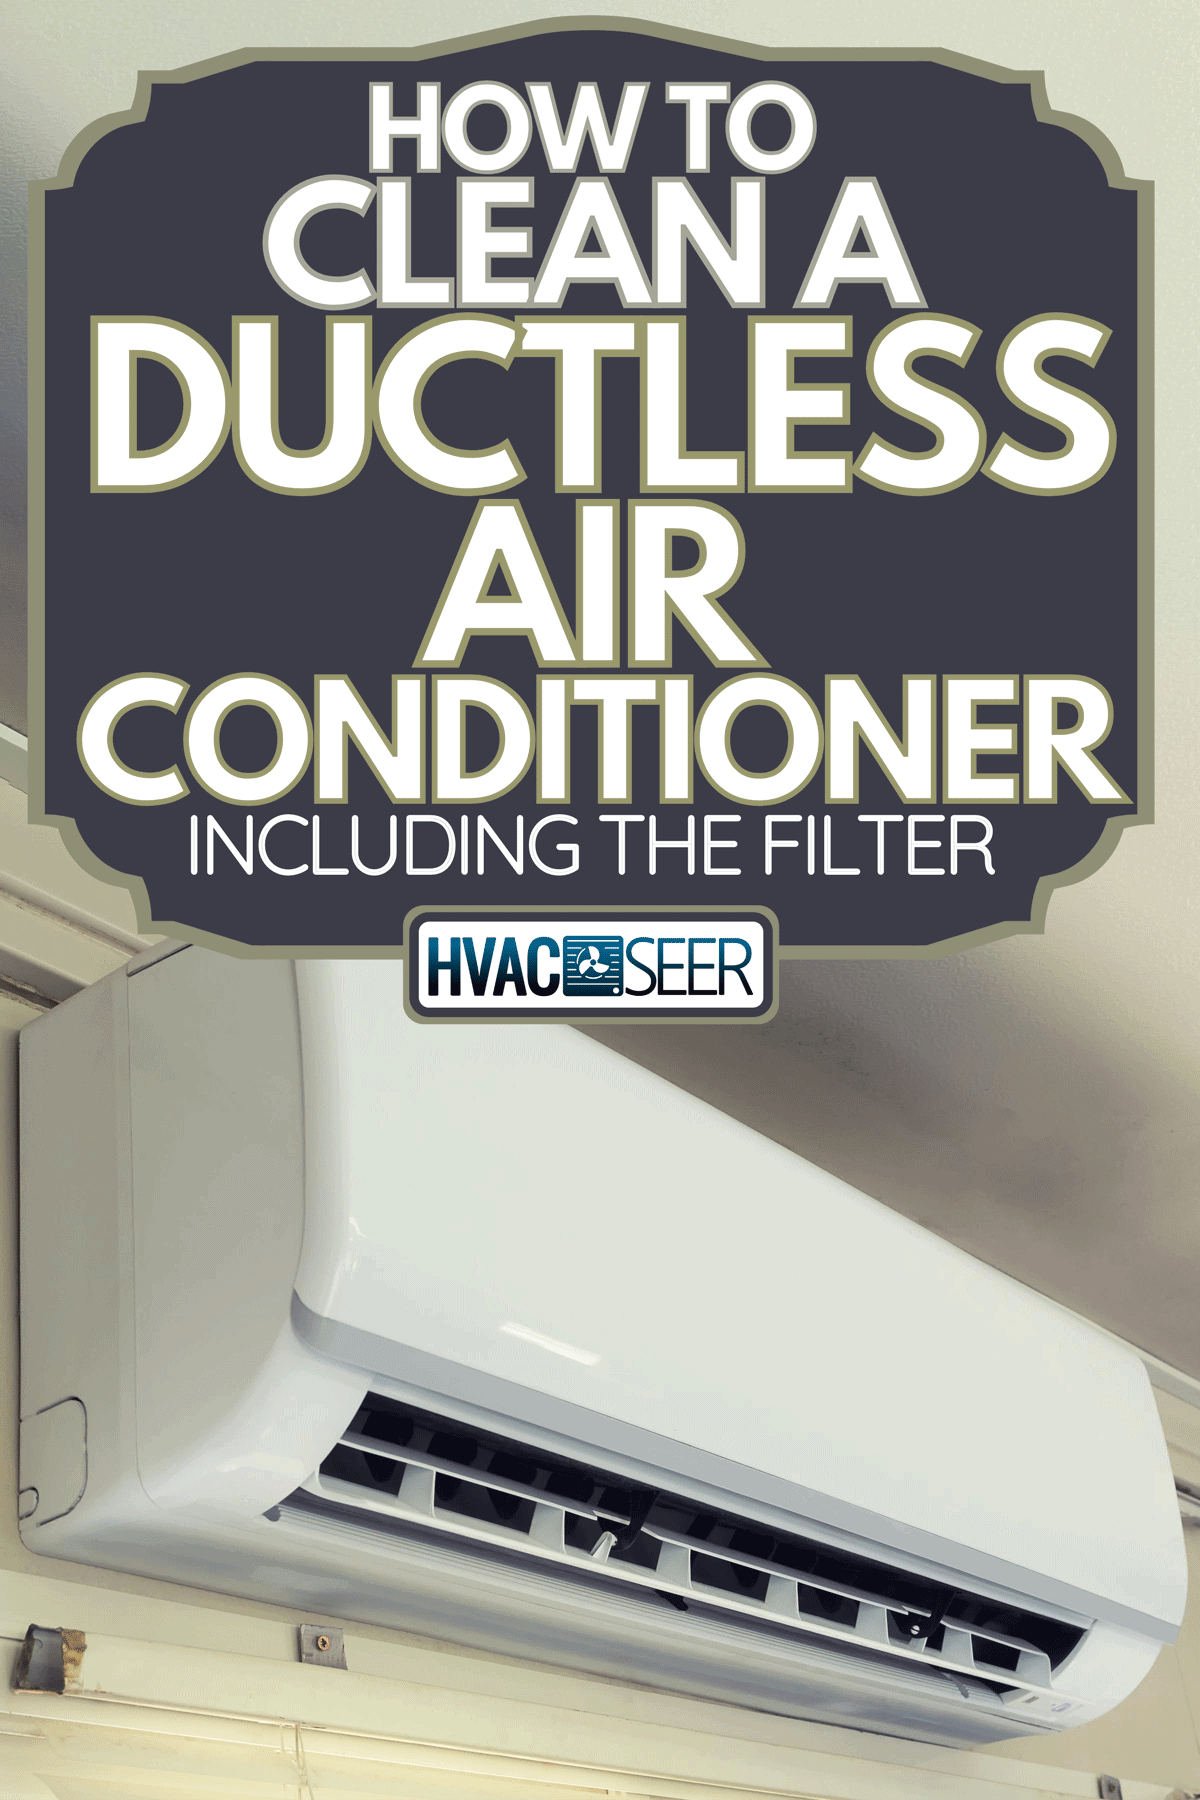 An Air conditioner (AC) indoor unit or evaporator and wall-mounted, How To Clean A Ductless Air Conditioner [Including The Filter]